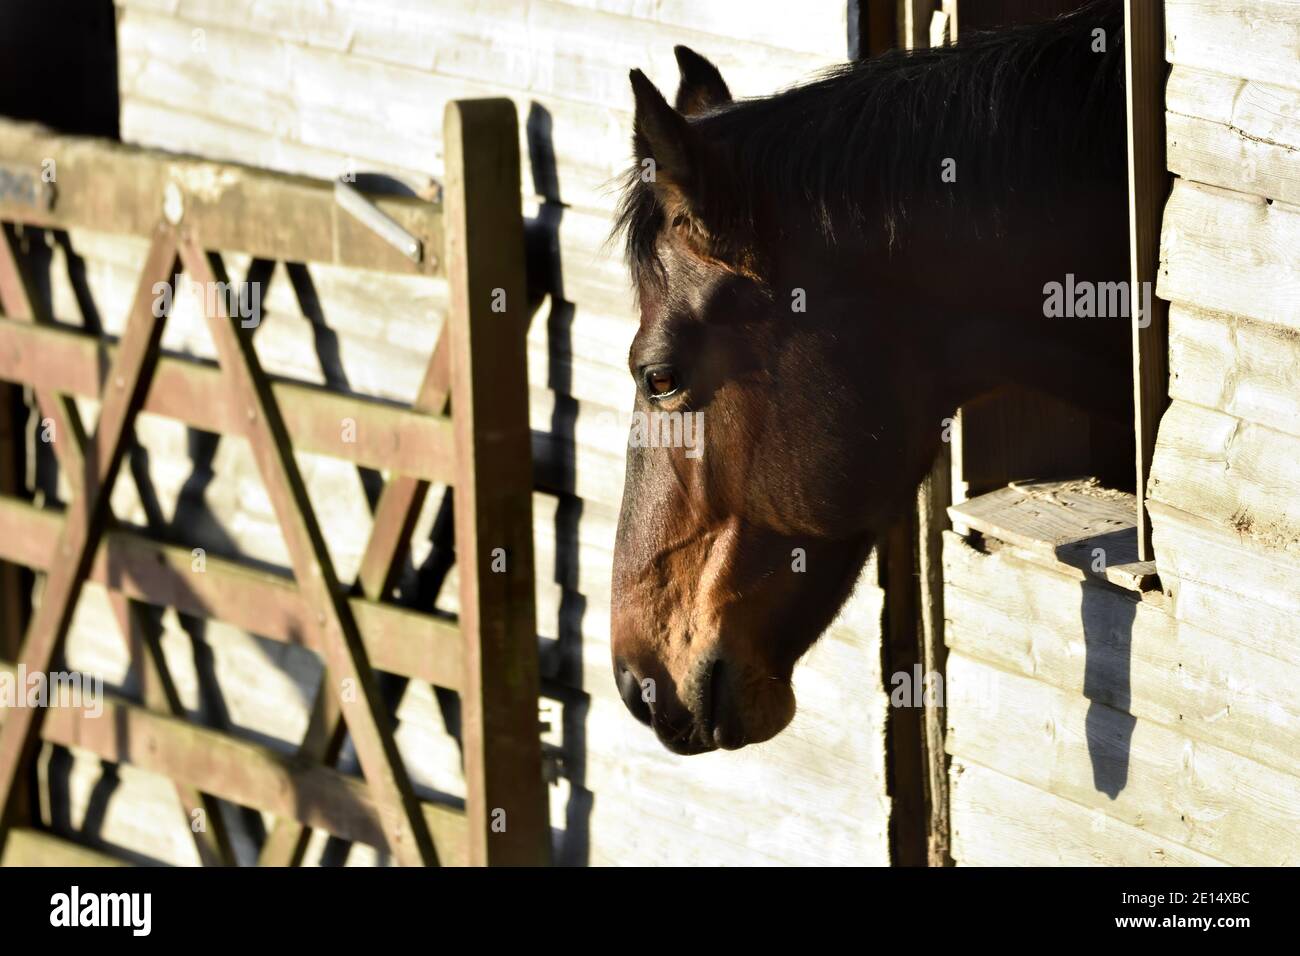 Horse sticking its head out of a window of its stable, Kent, England Stock Photo